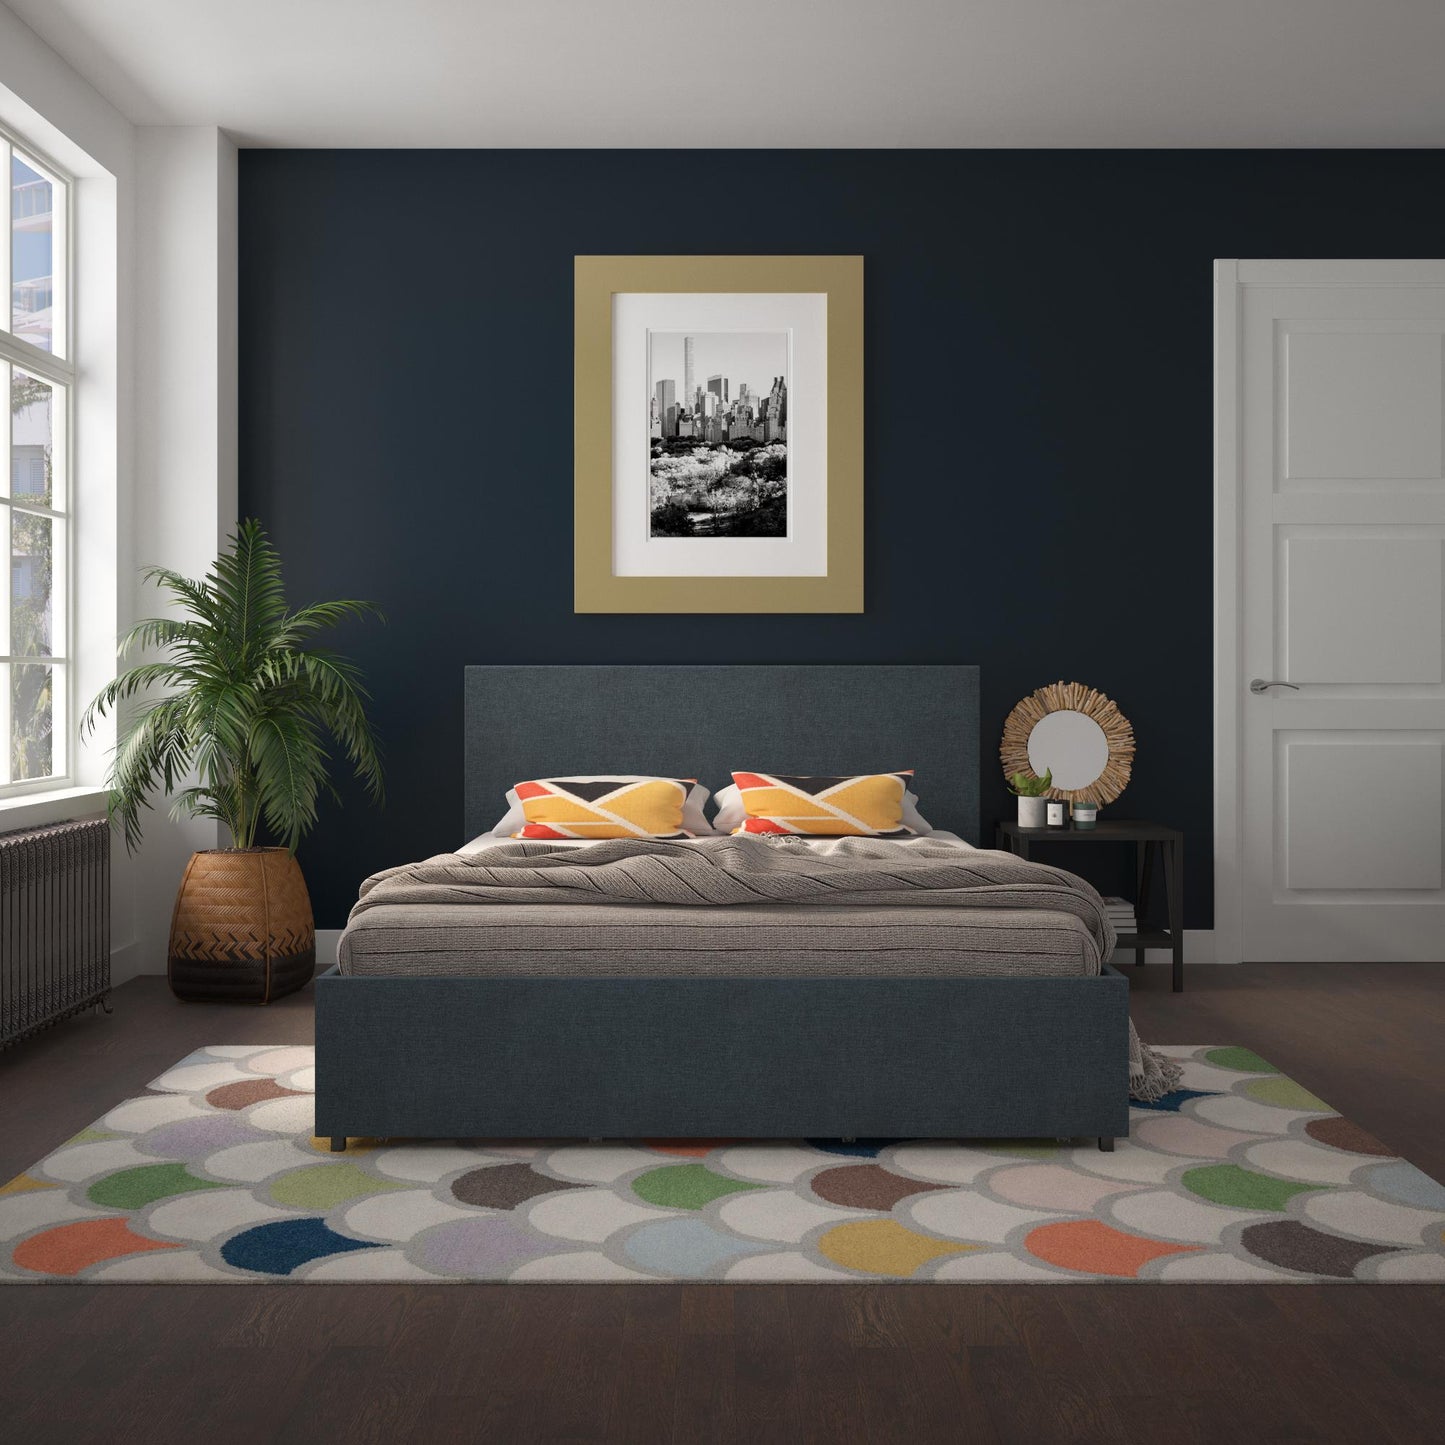 Kelly Upholstered Bed with Storage - Navy - Full